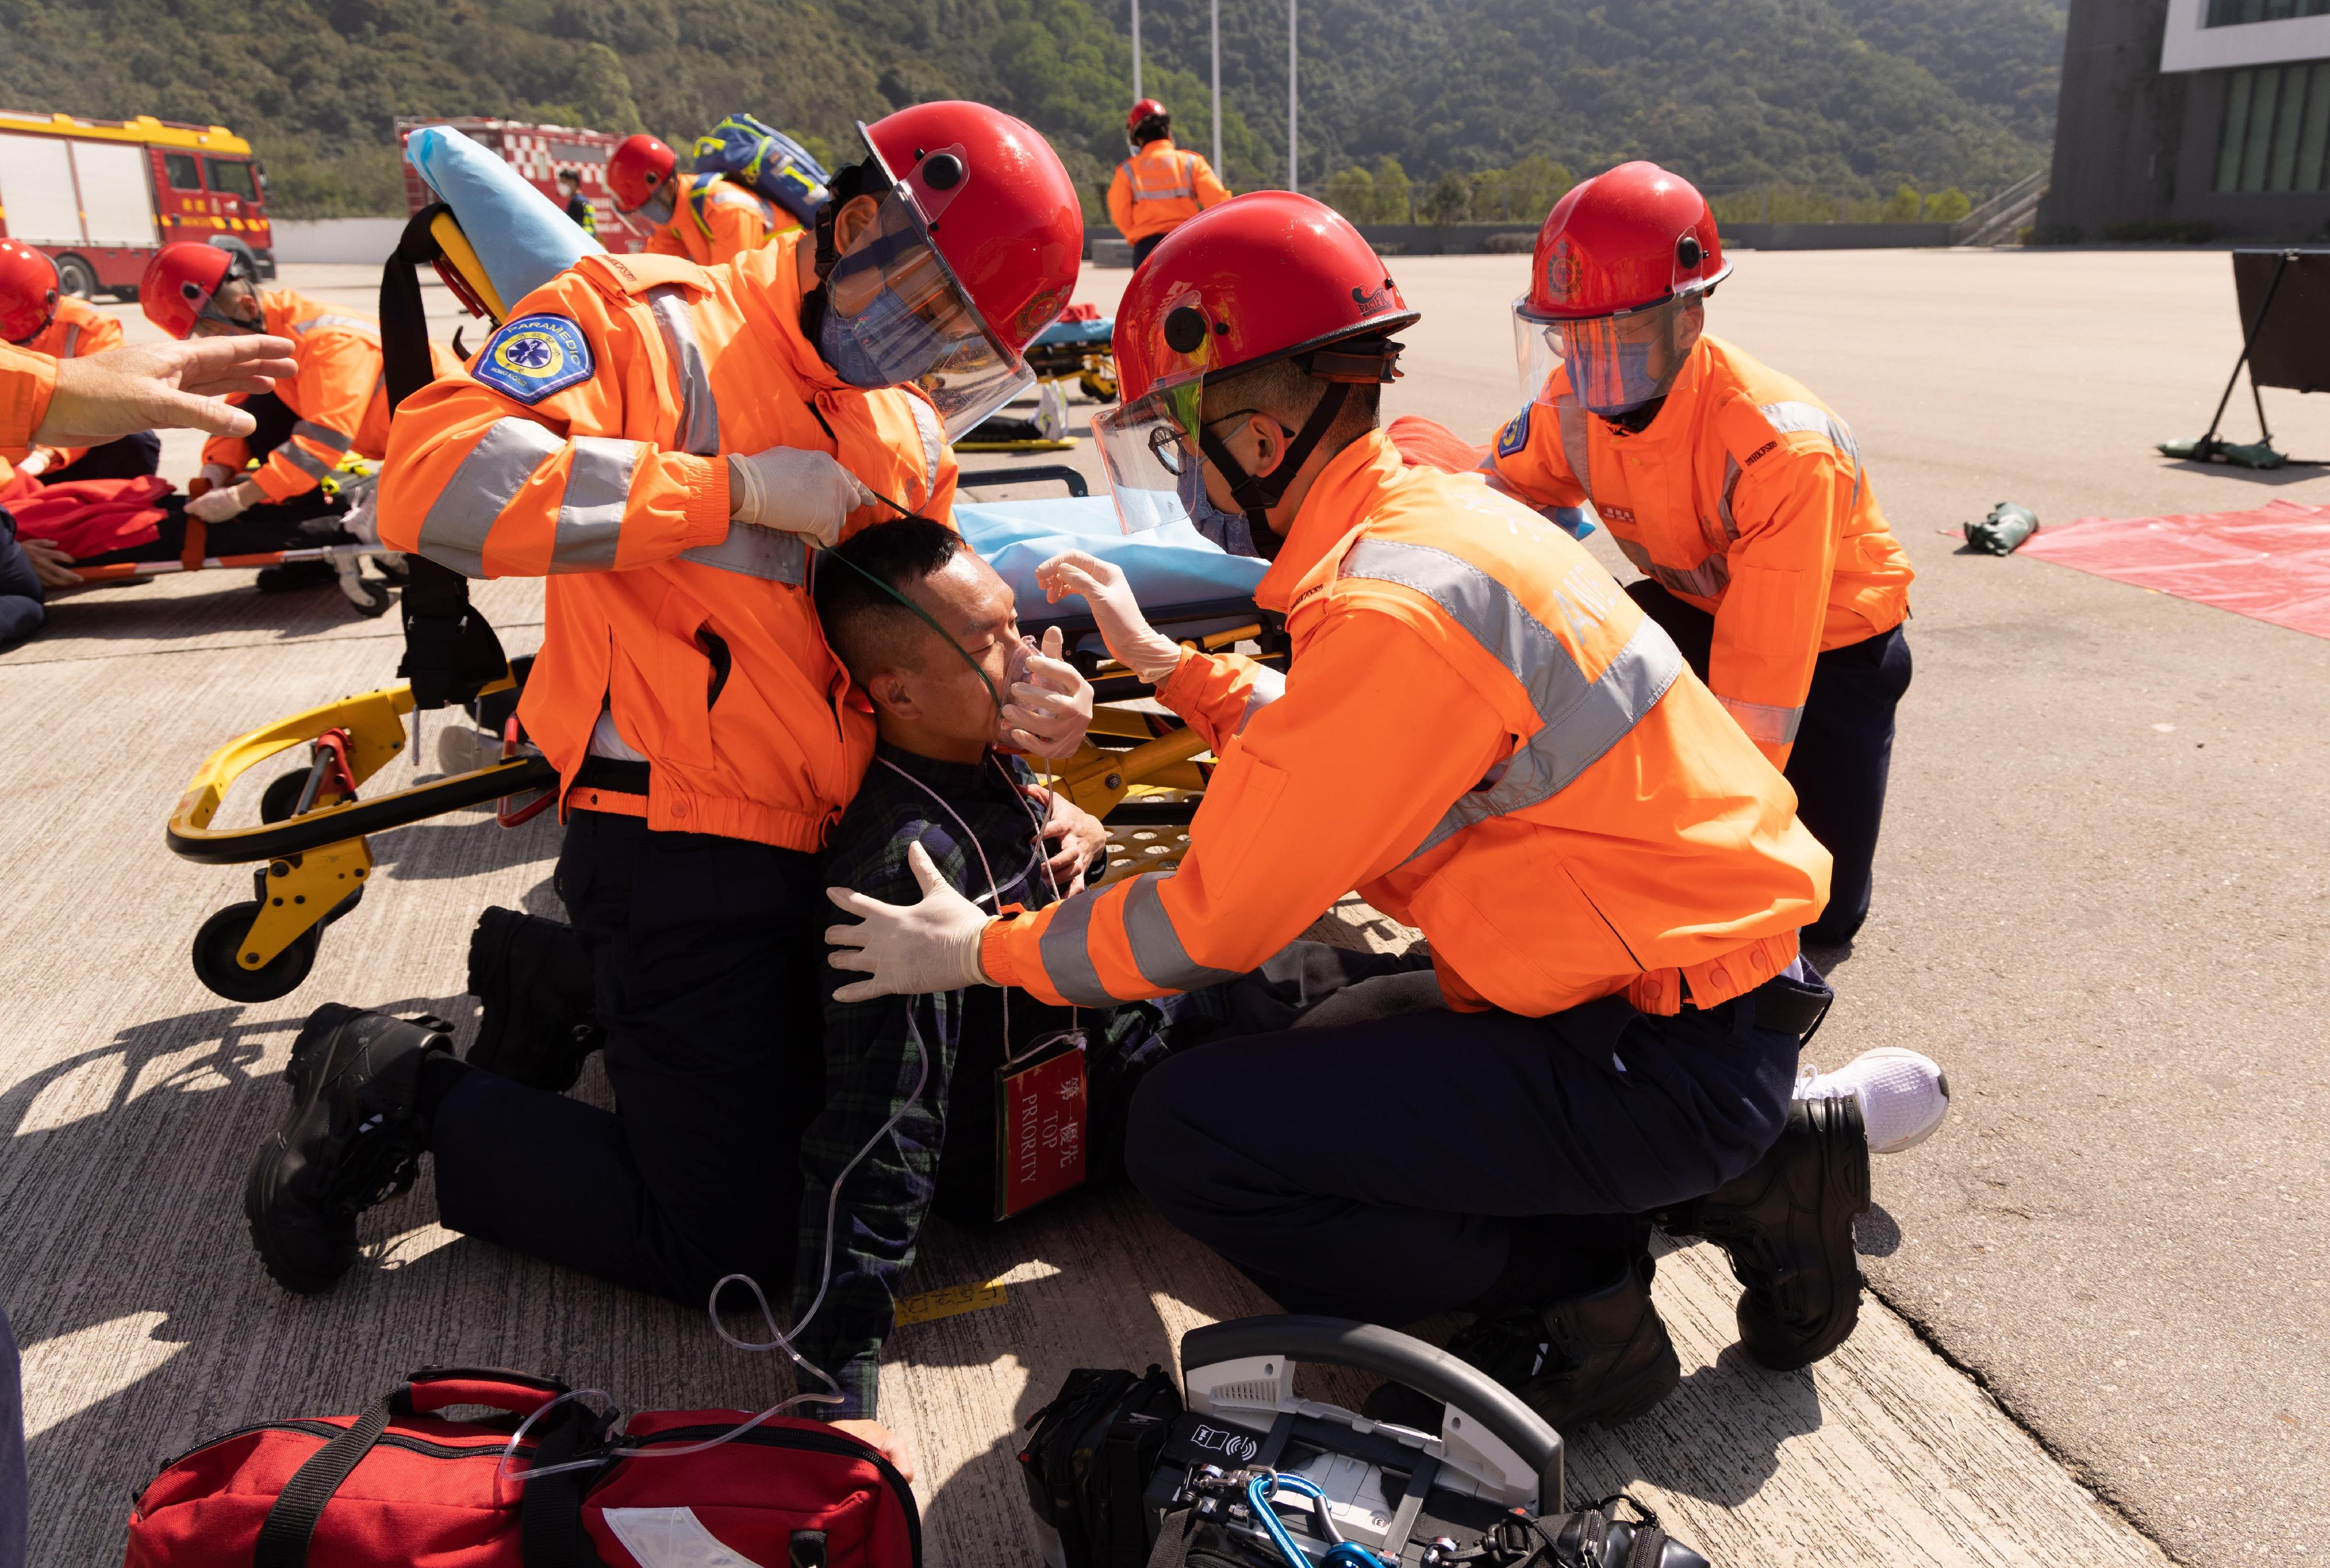 The President of Legislative Council, Mr Andrew Leung, reviewed the Fire Services passing-out parade at the Fire and Ambulance Services Academy today (February 17). Photo shows graduates demonstrating rescue techniques.